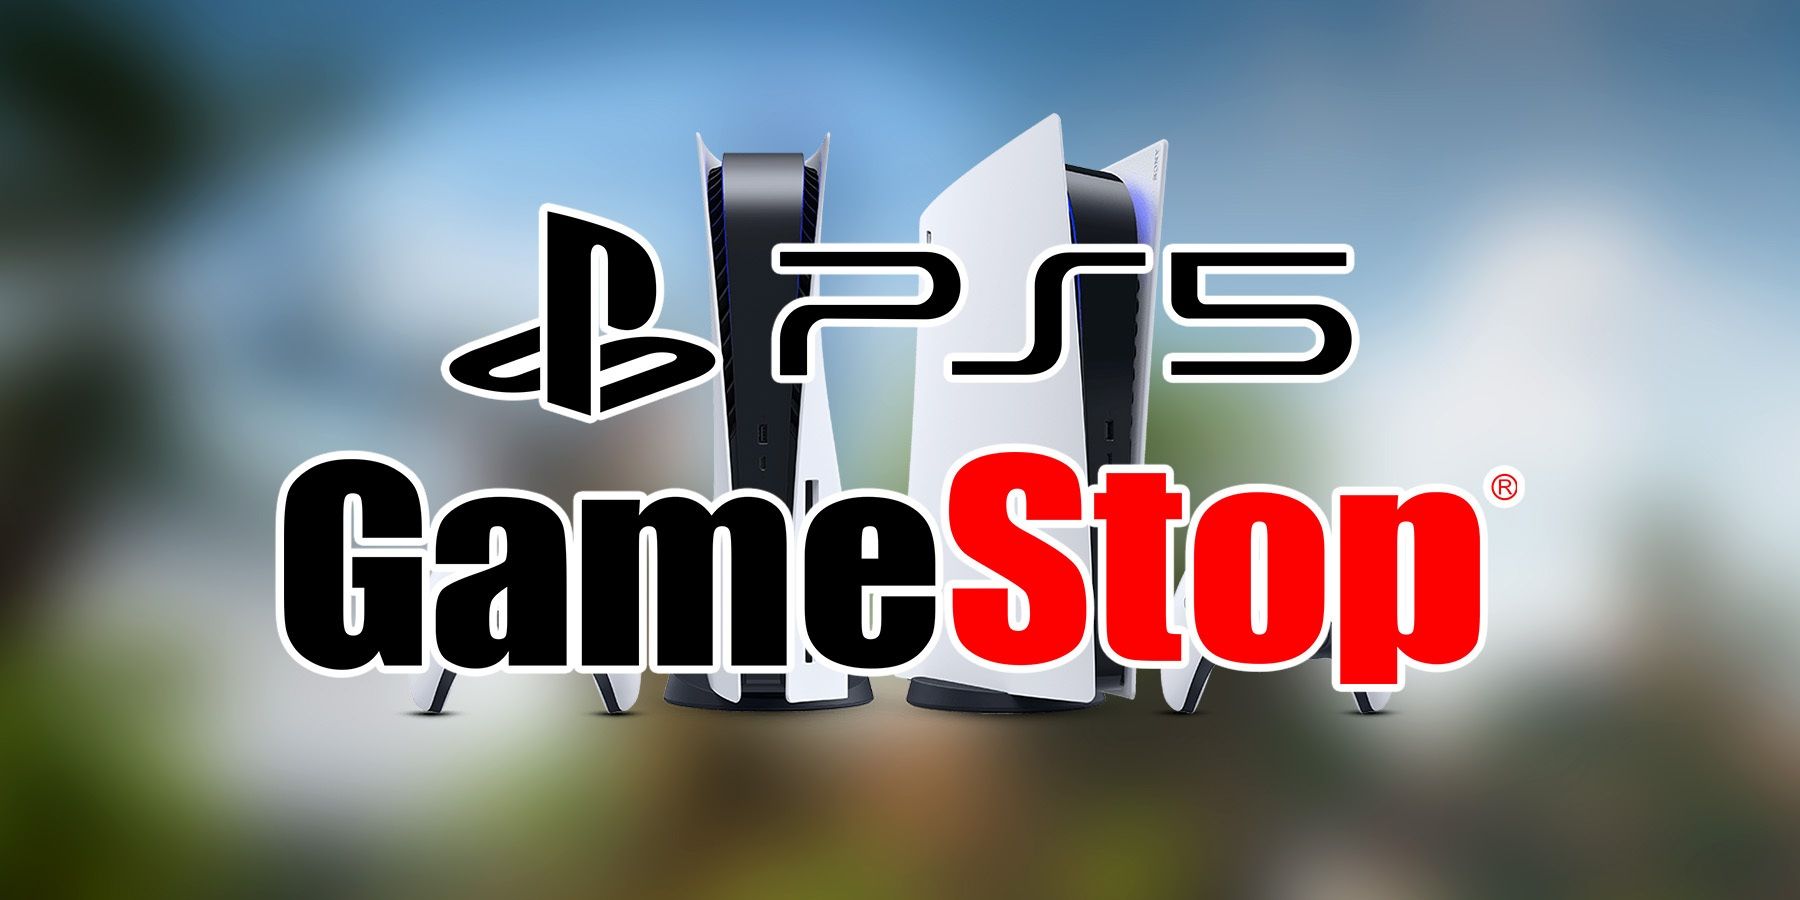 PS5 Restock Updates for GameStop, Best Buy, SUP3R5 and More